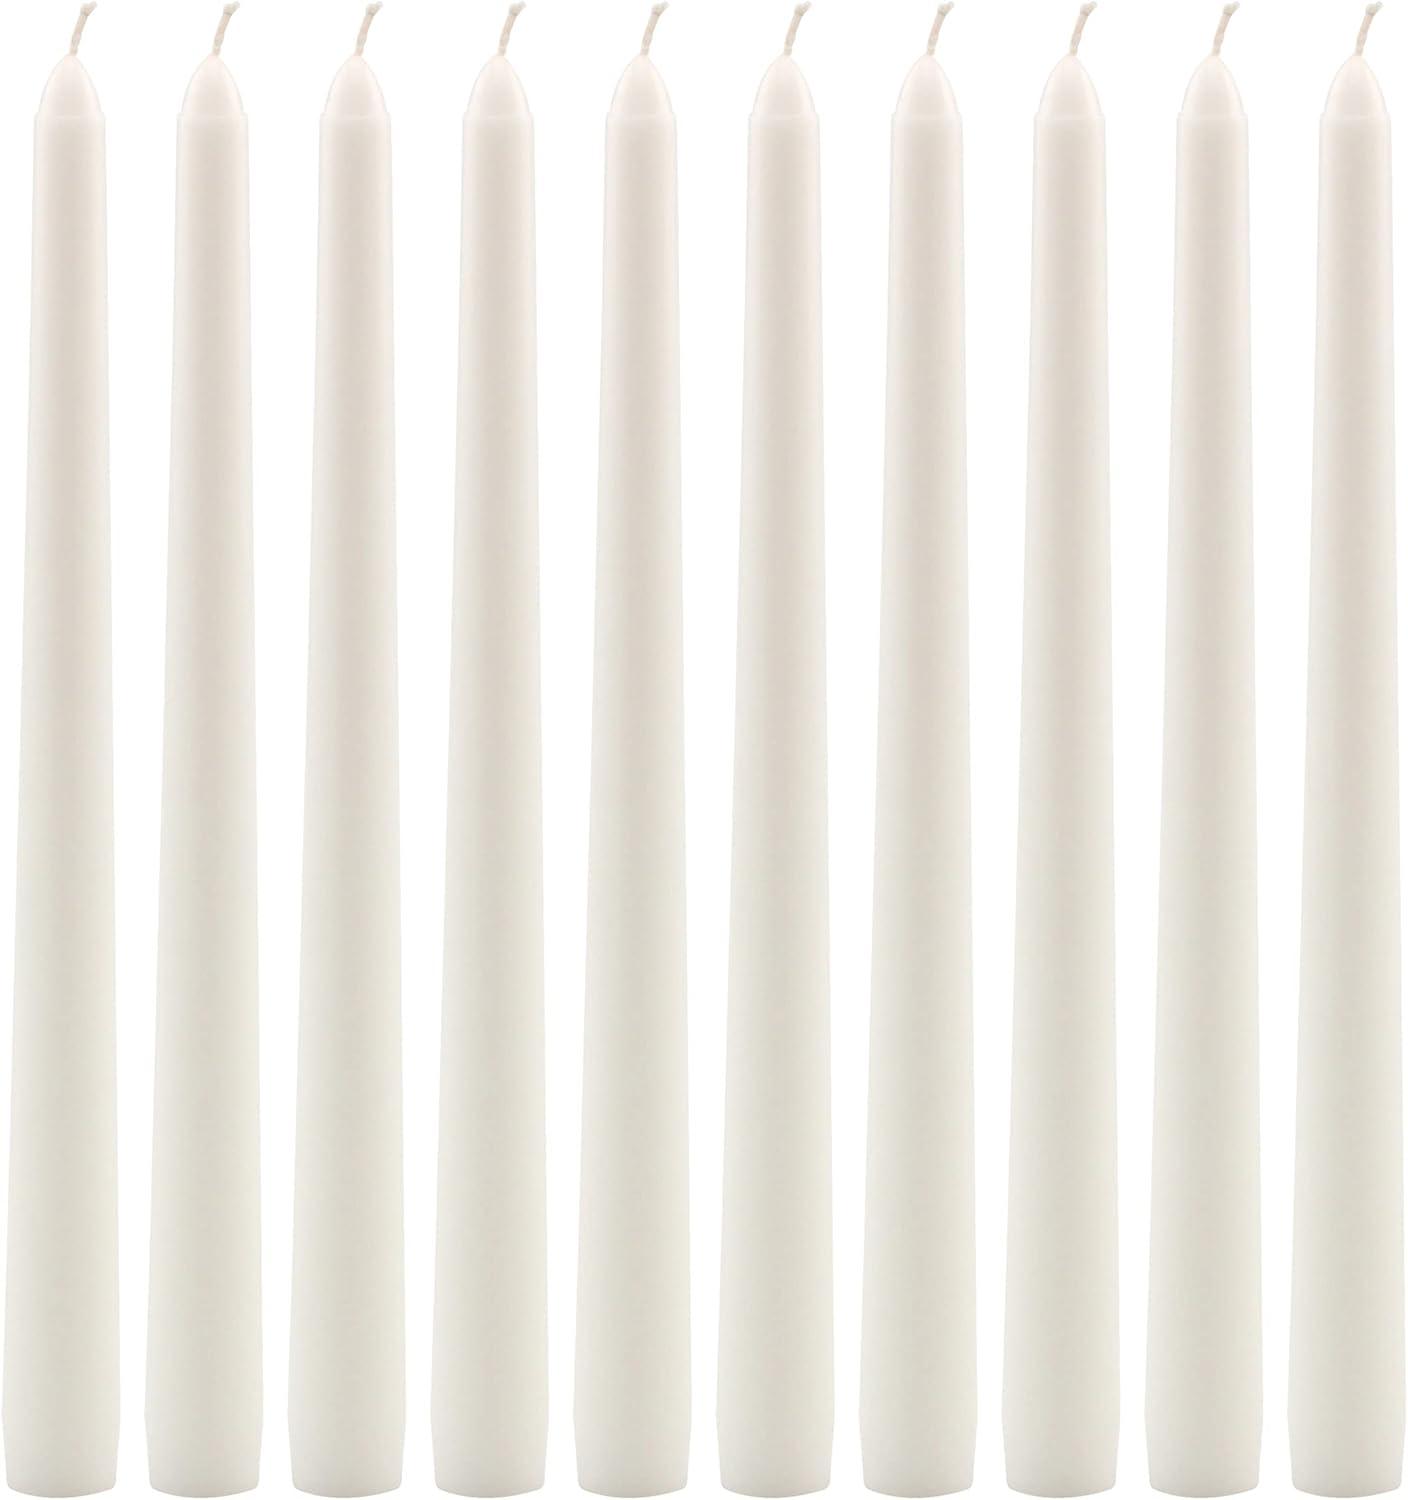 Elegant 10" White Paraffin Wax Taper Candles, 10-Pack